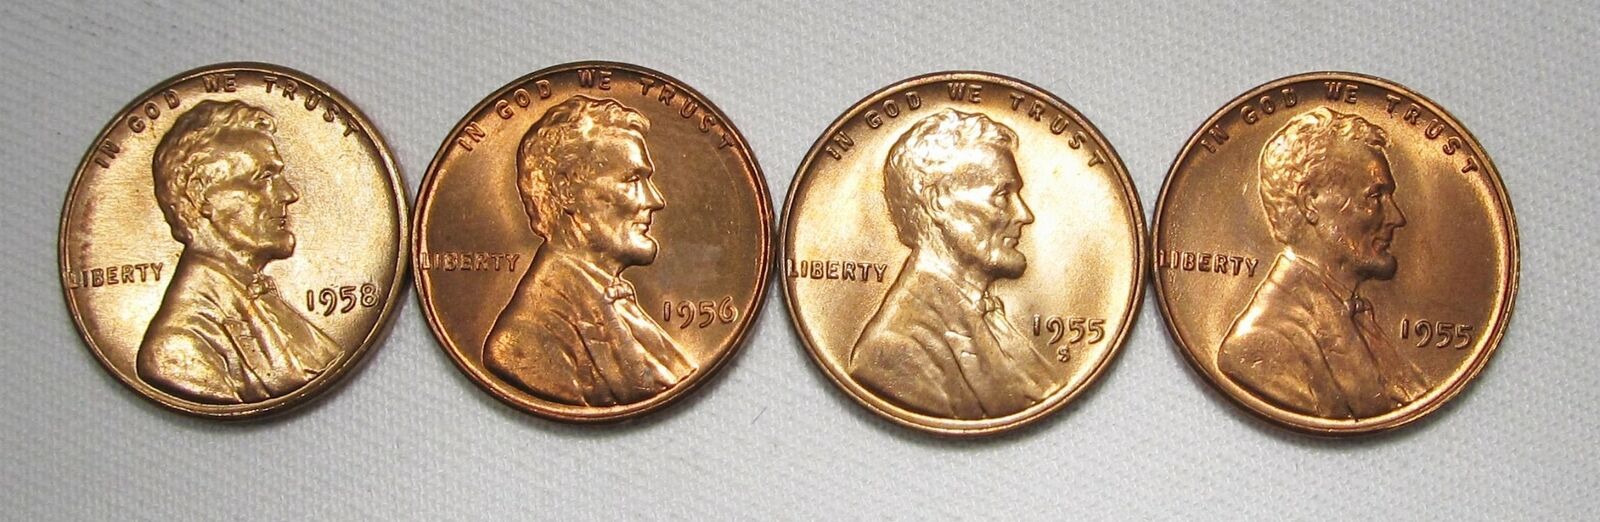 Primary image for 1955-P & S, 1956-P, 1958-P Lincoln Wheat Cents Lot of 4 VCH-GEM UNC Coins AE971